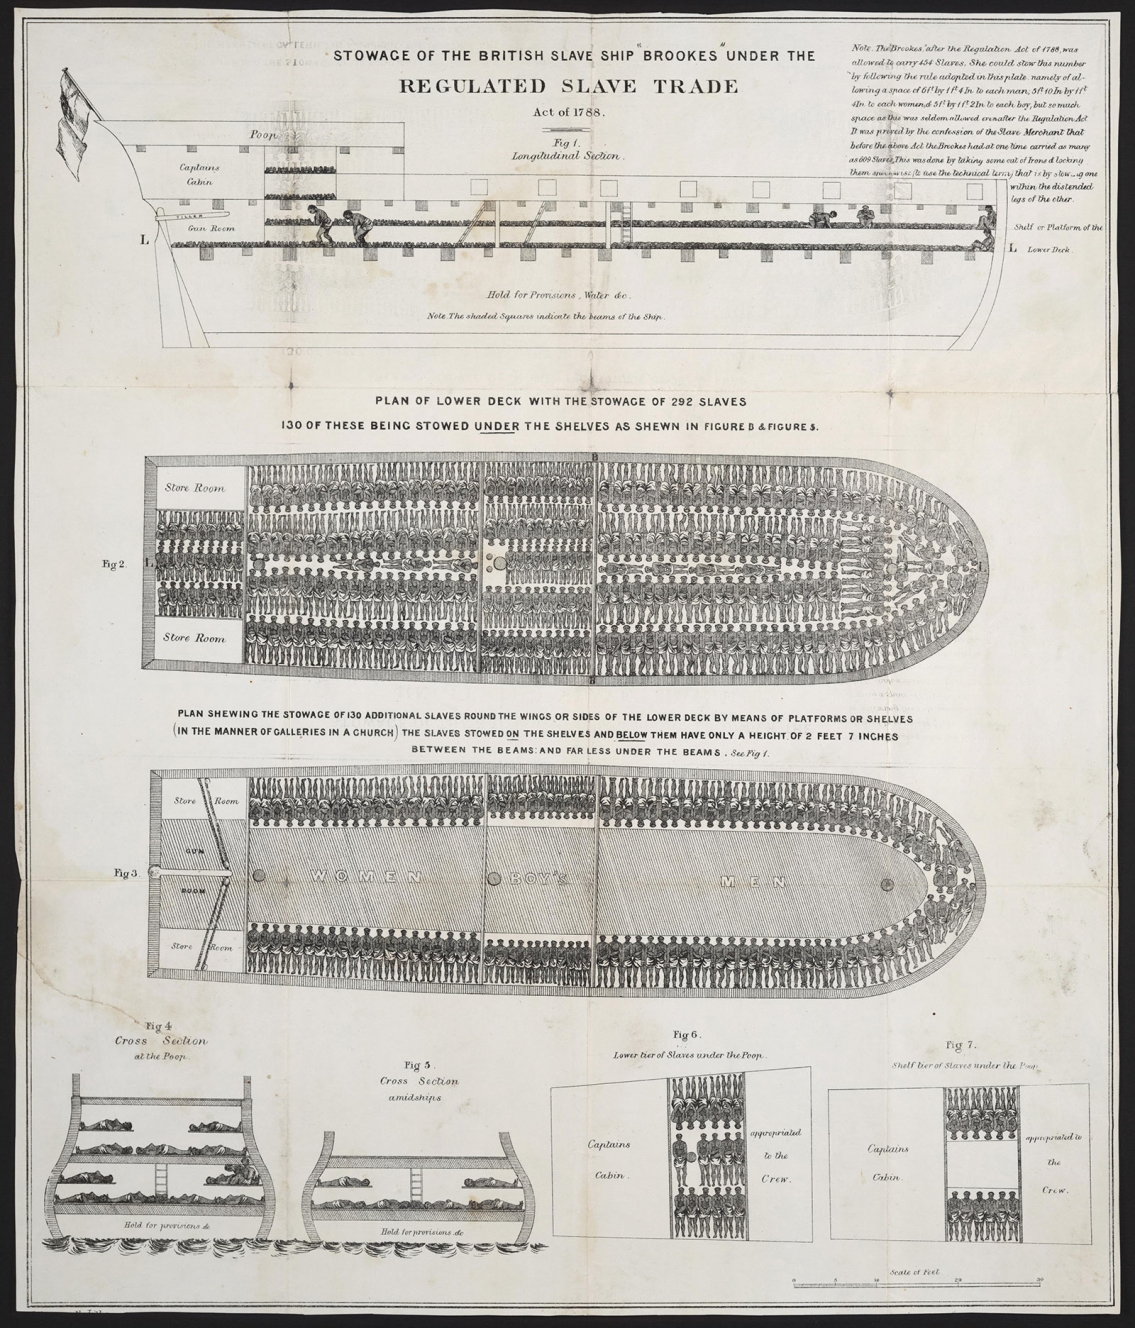 Regulated Slave Trade - Stowage of the British Slave Ship, 1788